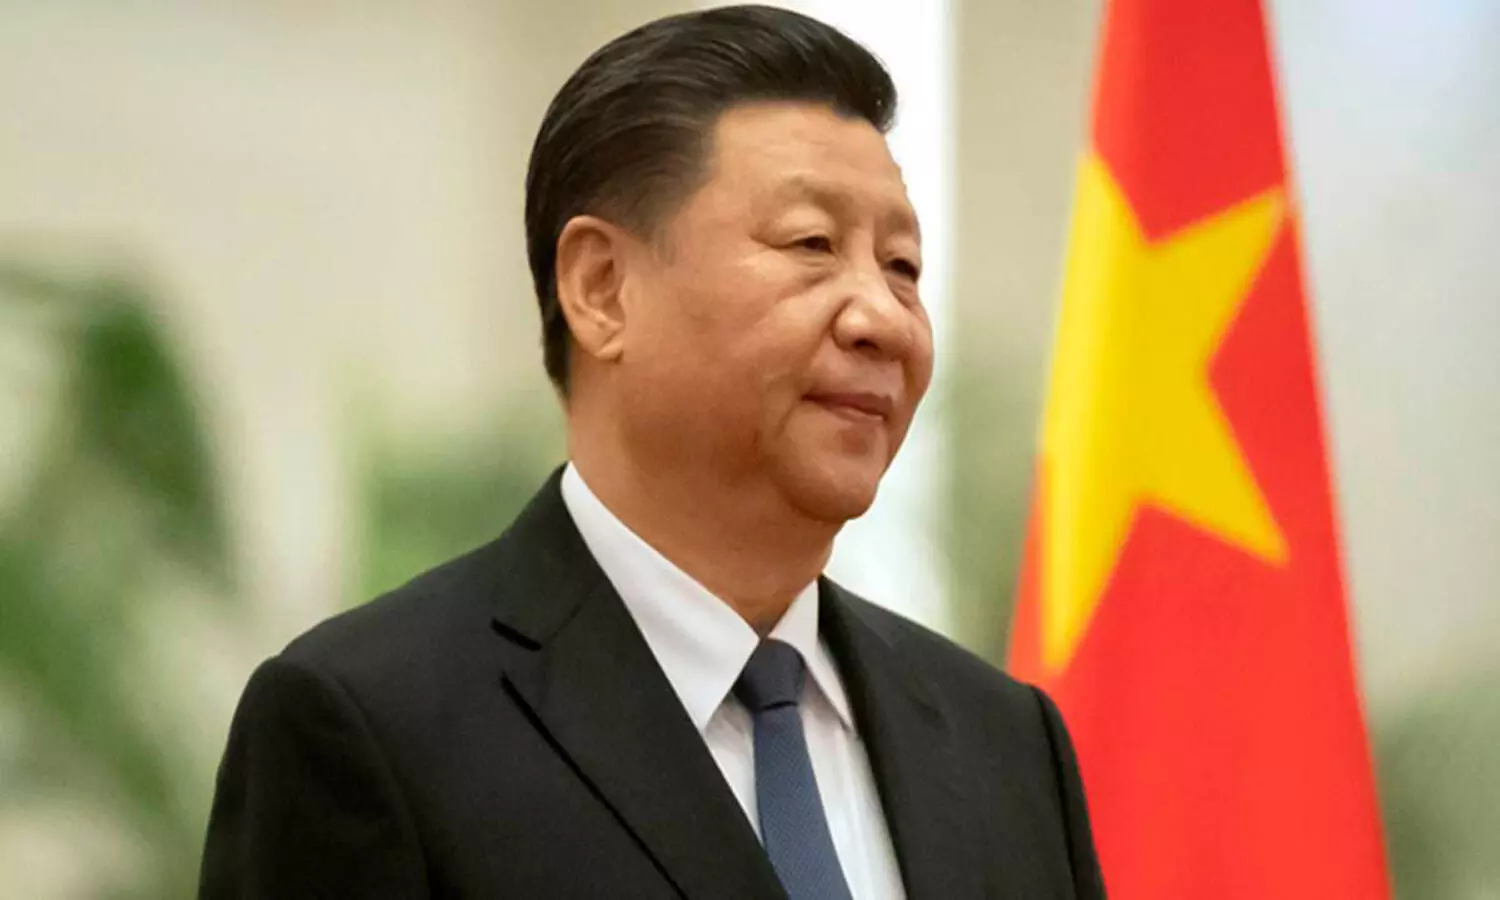 Xi Jinpings final purge ahead of party meet includes tigers and flies